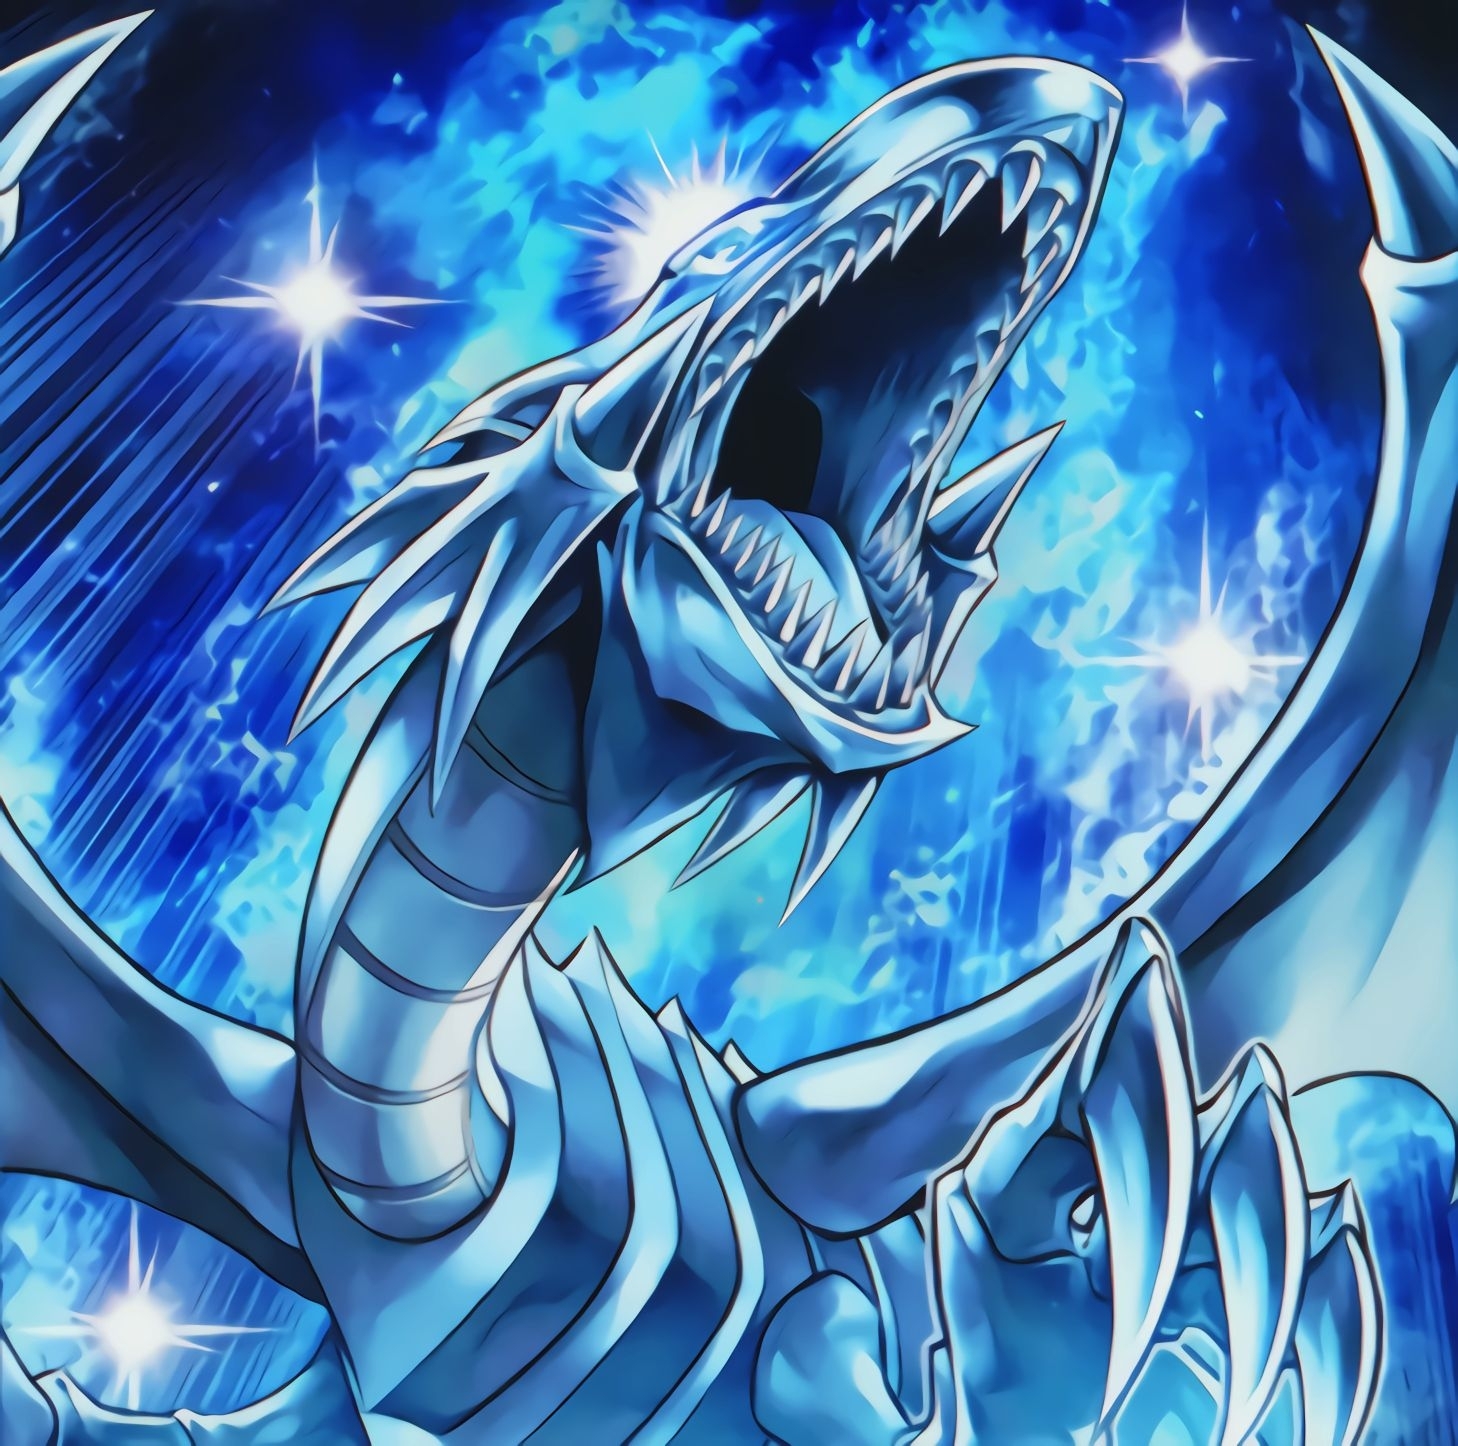 10 Top And Most Recent Yugioh Blue Eyes White Dragon Wallpaper for Desktop ...